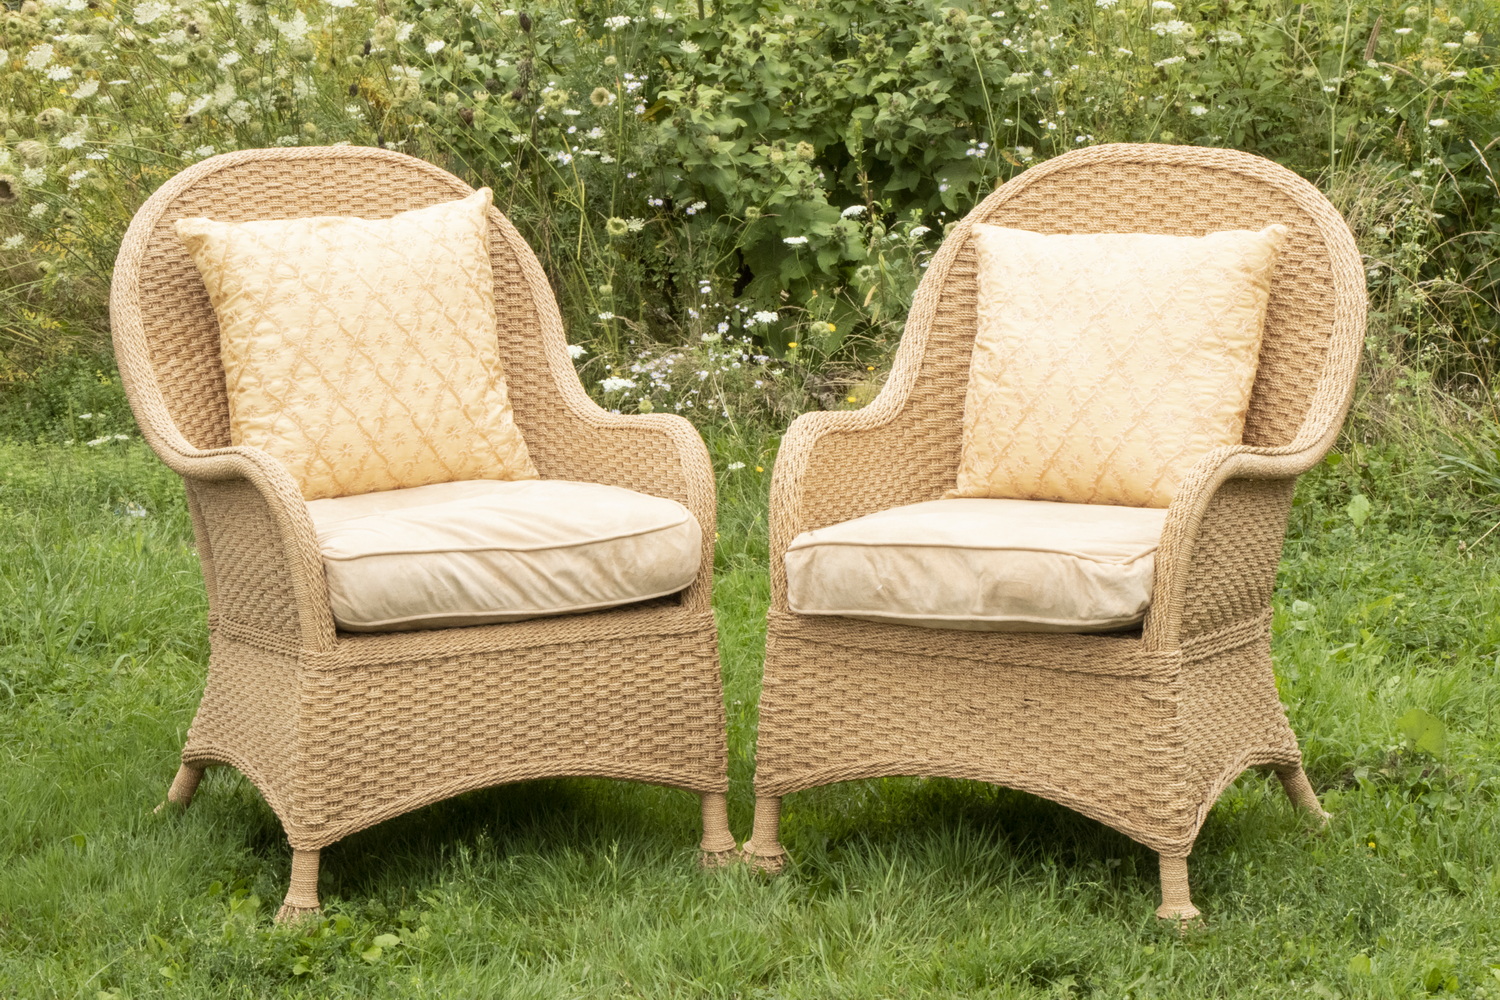 PR WOVEN ROPE ARMCHAIRS Pair of